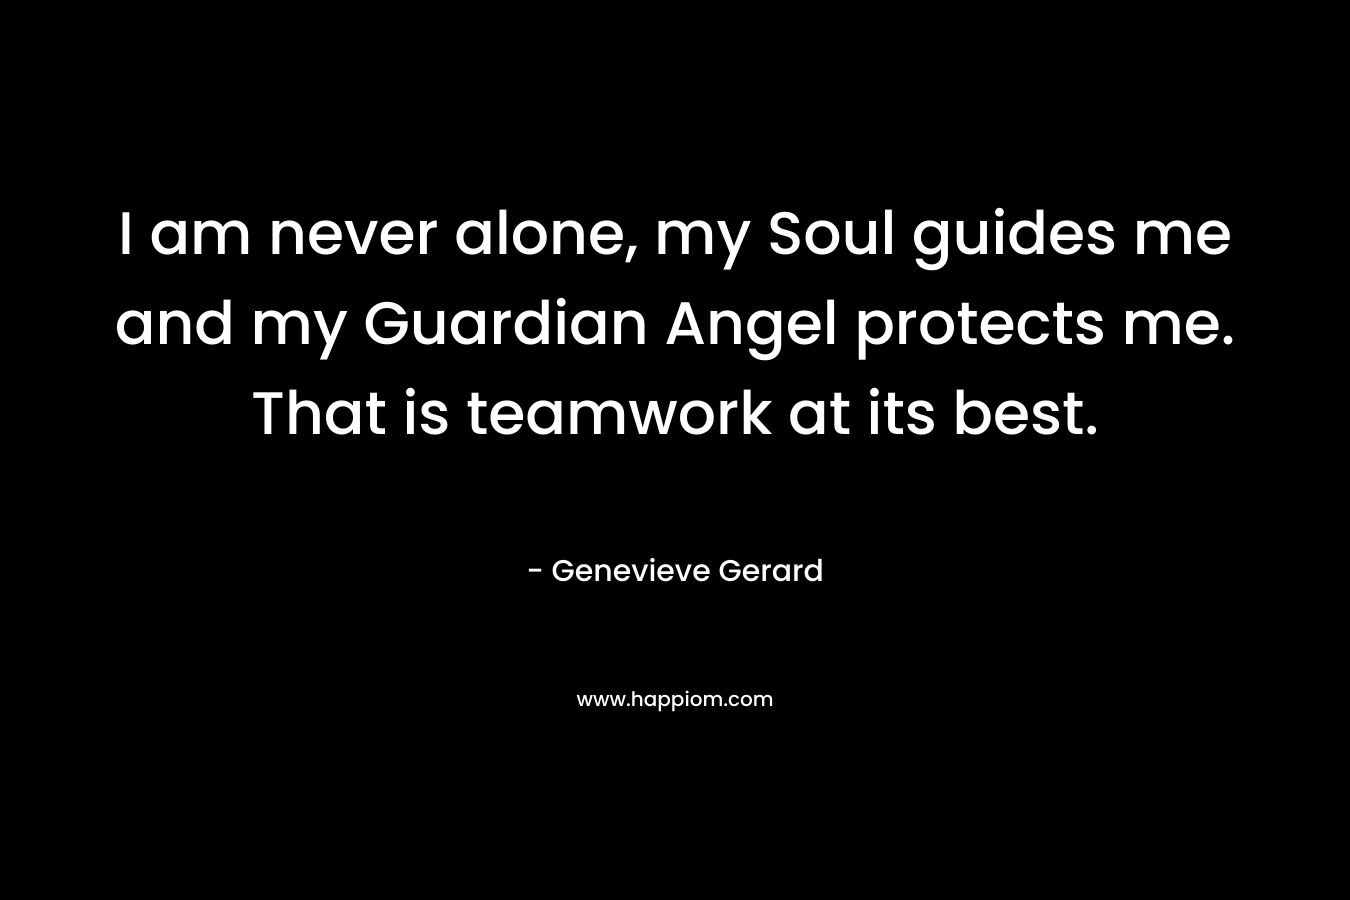 I am never alone, my Soul guides me and my Guardian Angel protects me. That is teamwork at its best.